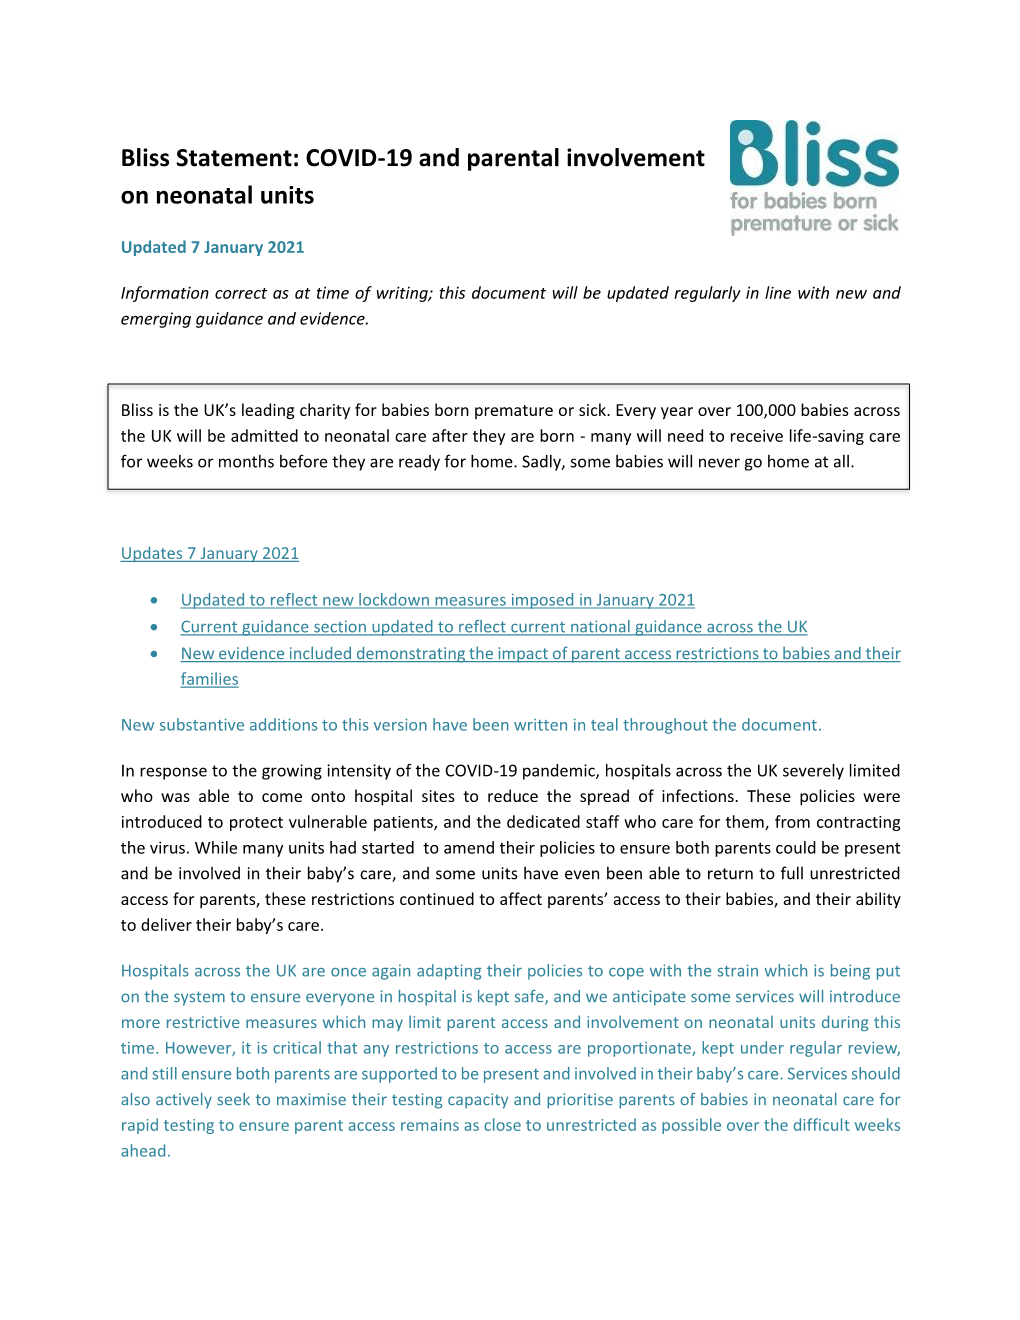 Bliss Statement: COVID-19 and Parental Involvement on Neonatal Units